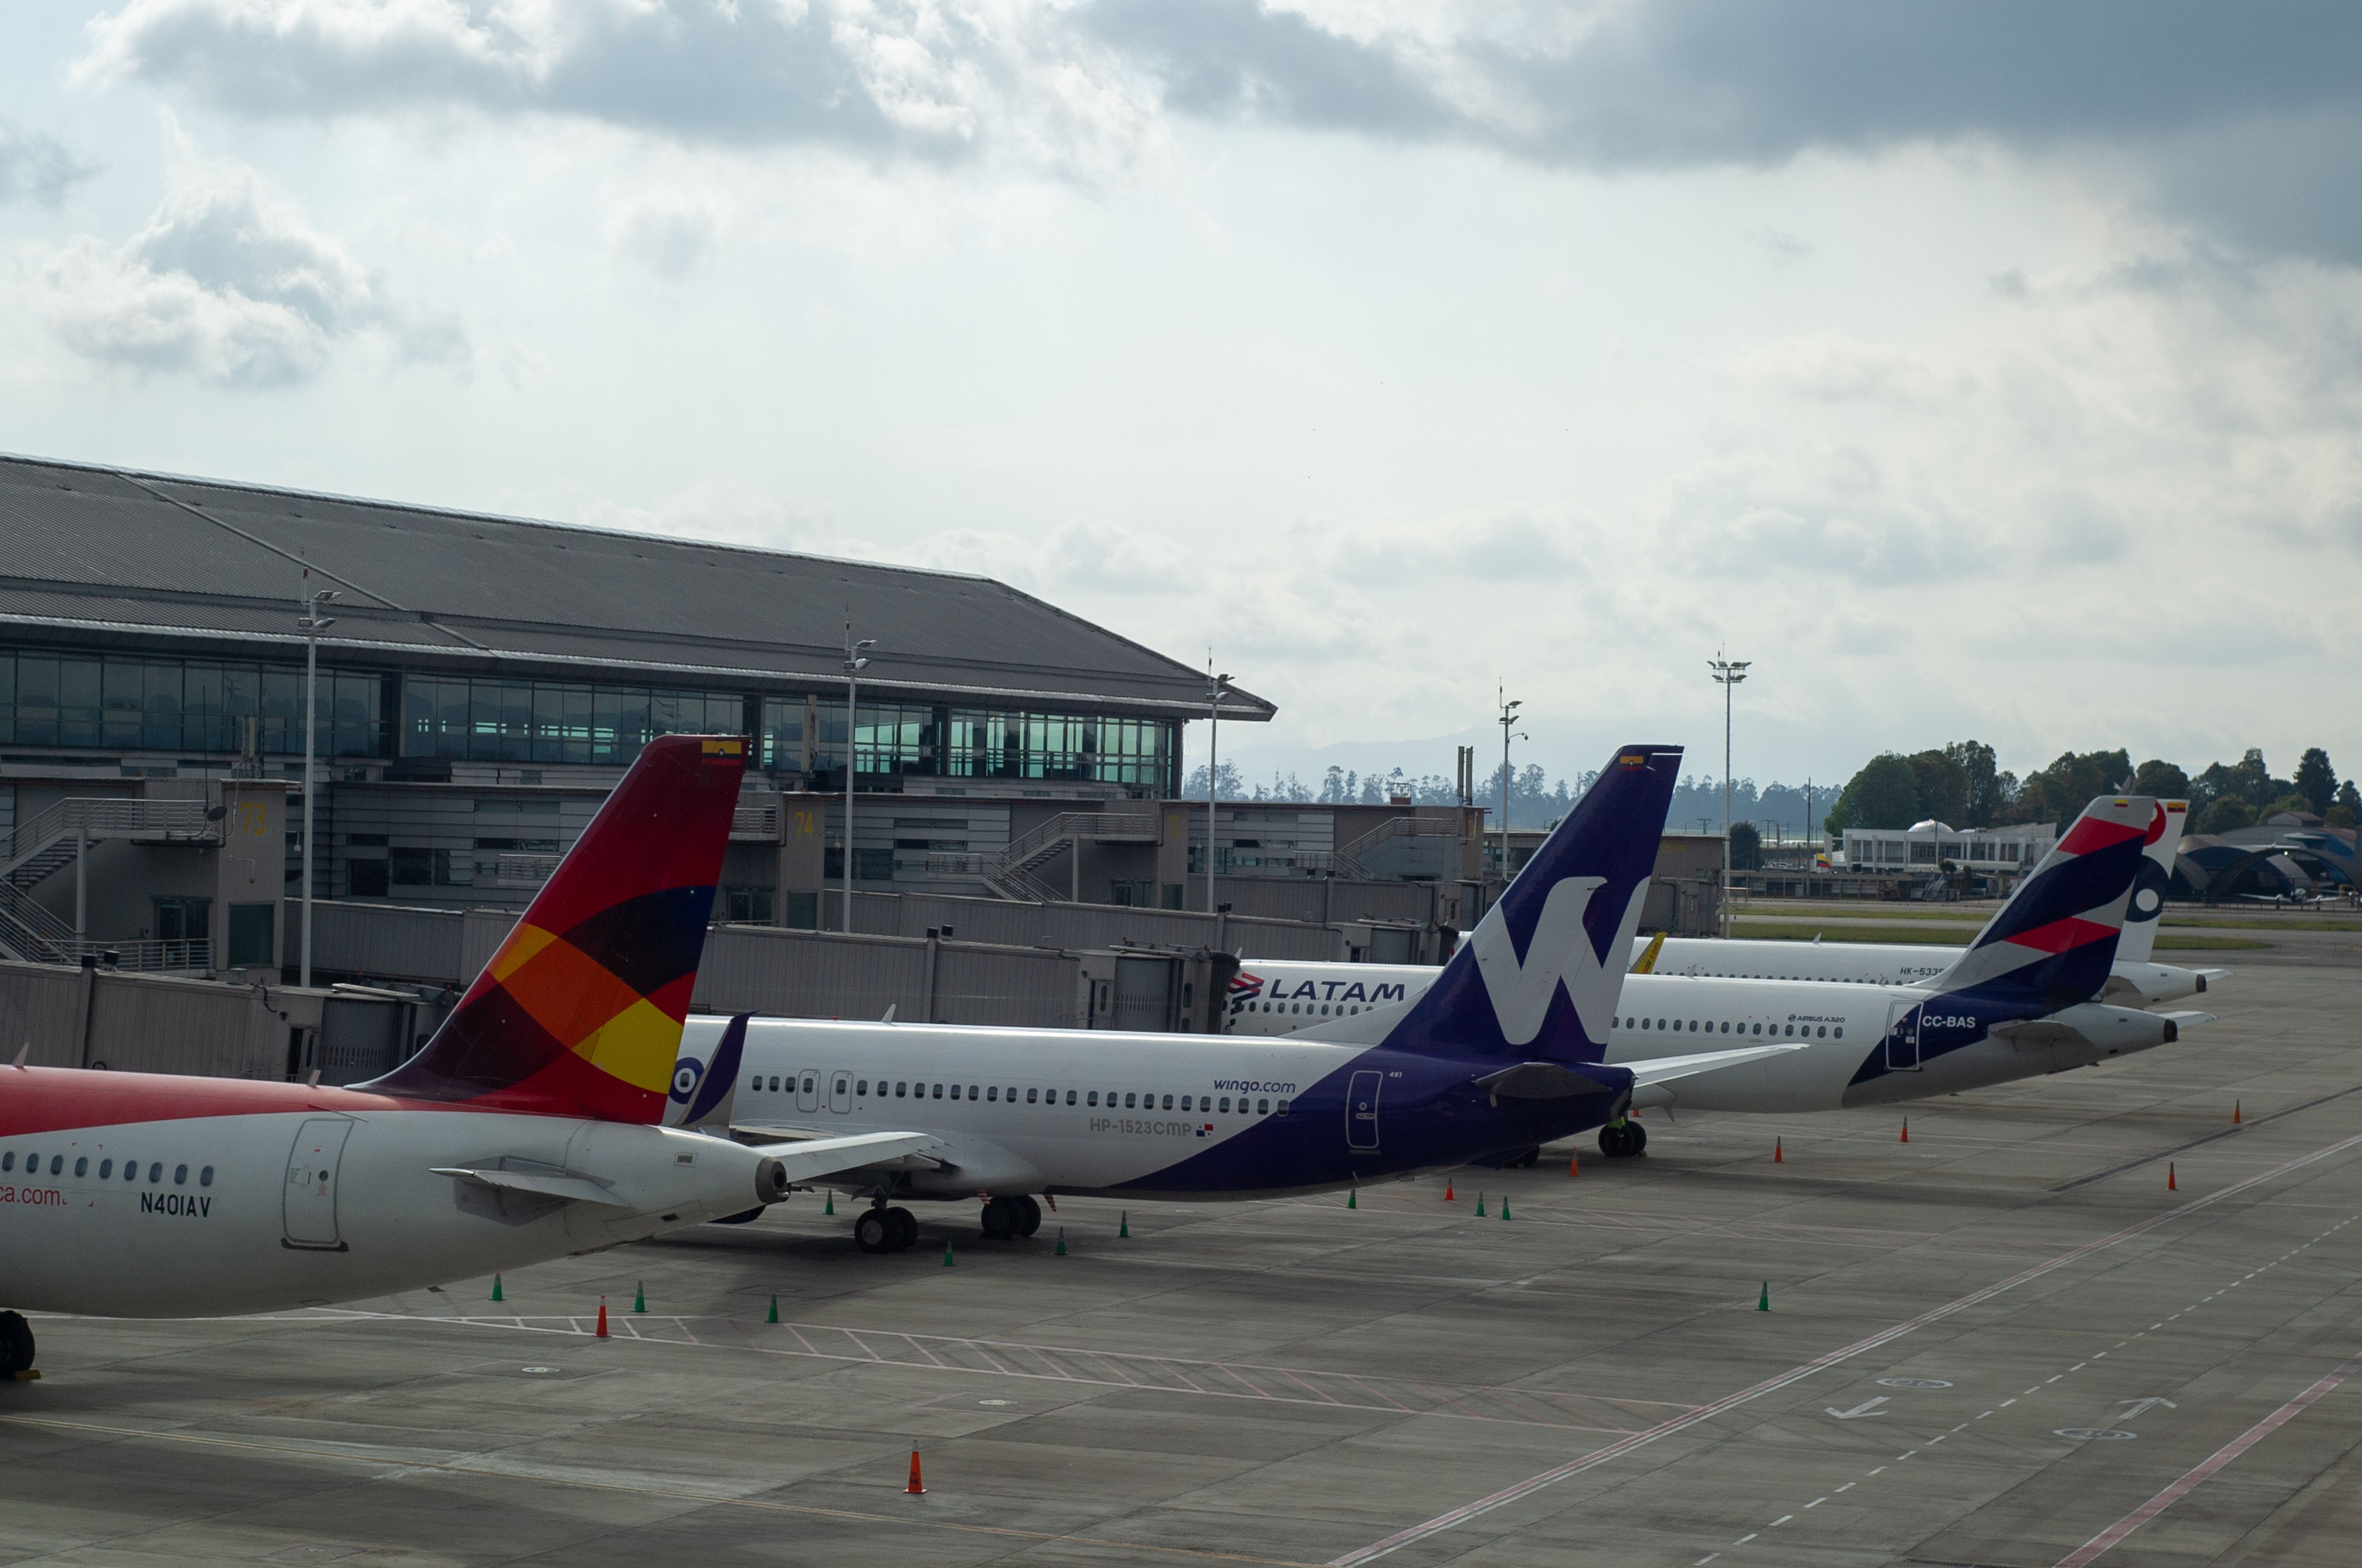 Four aircraft from four different airlines, Avianca, Wingo, LATAM, and Viva, parked at El Dorado Airport, Bogotá. 